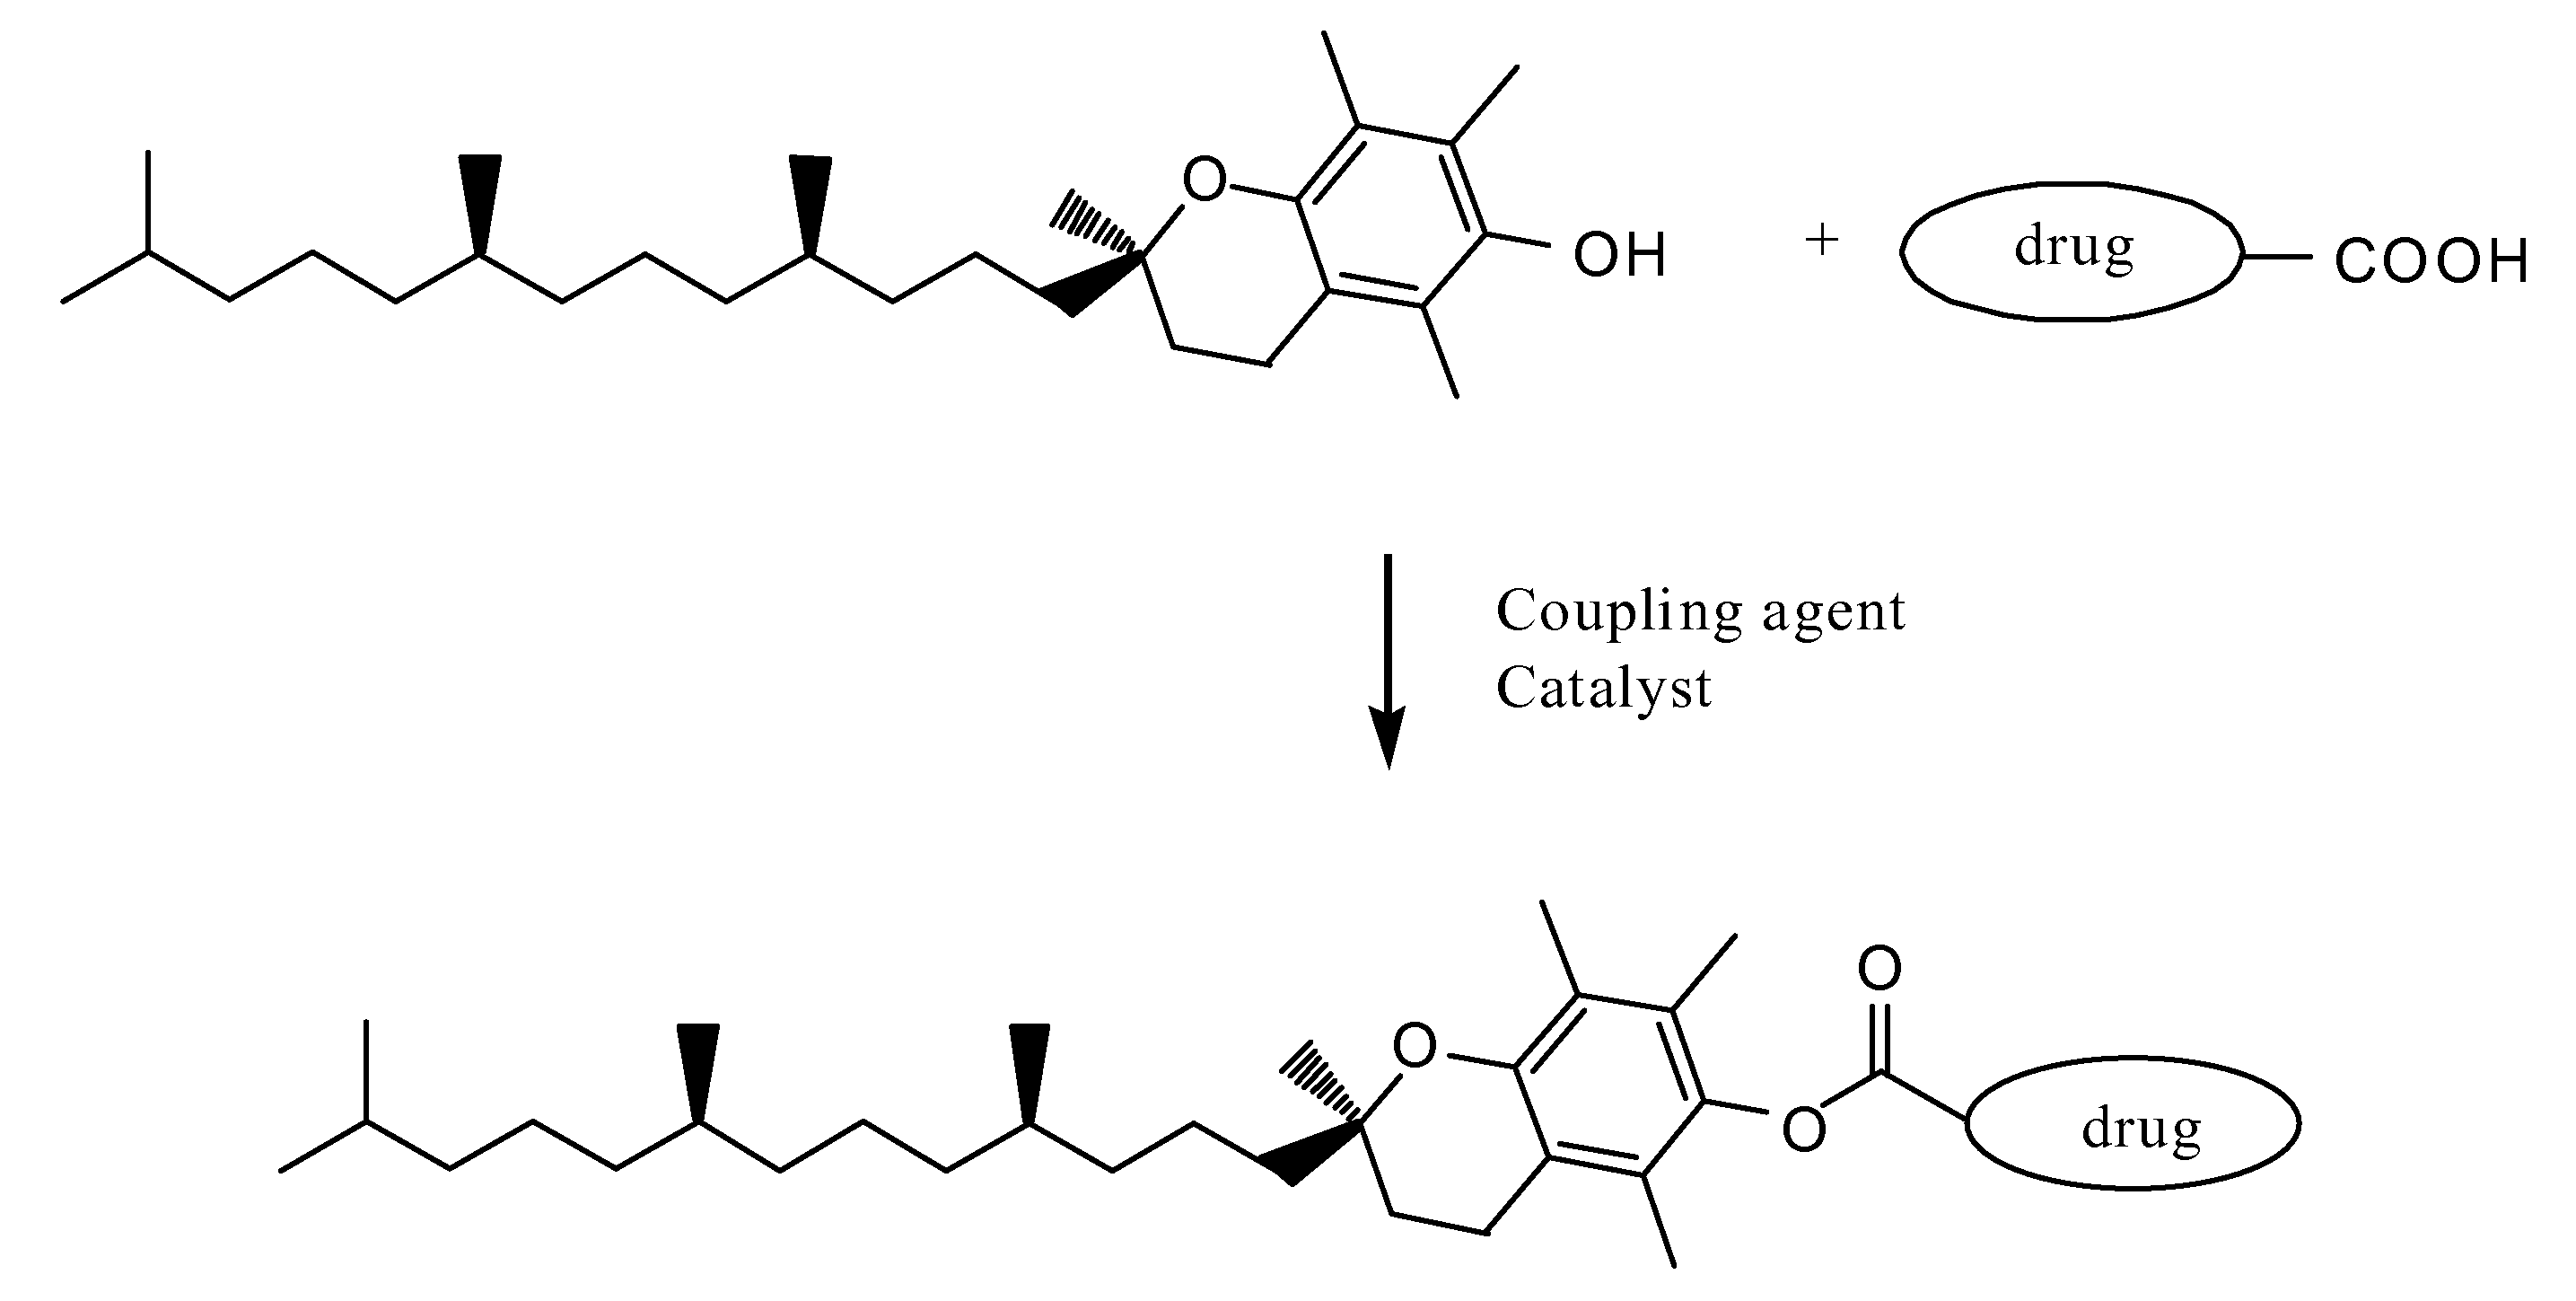 Tocopherol-modified therapeutic drug compounds